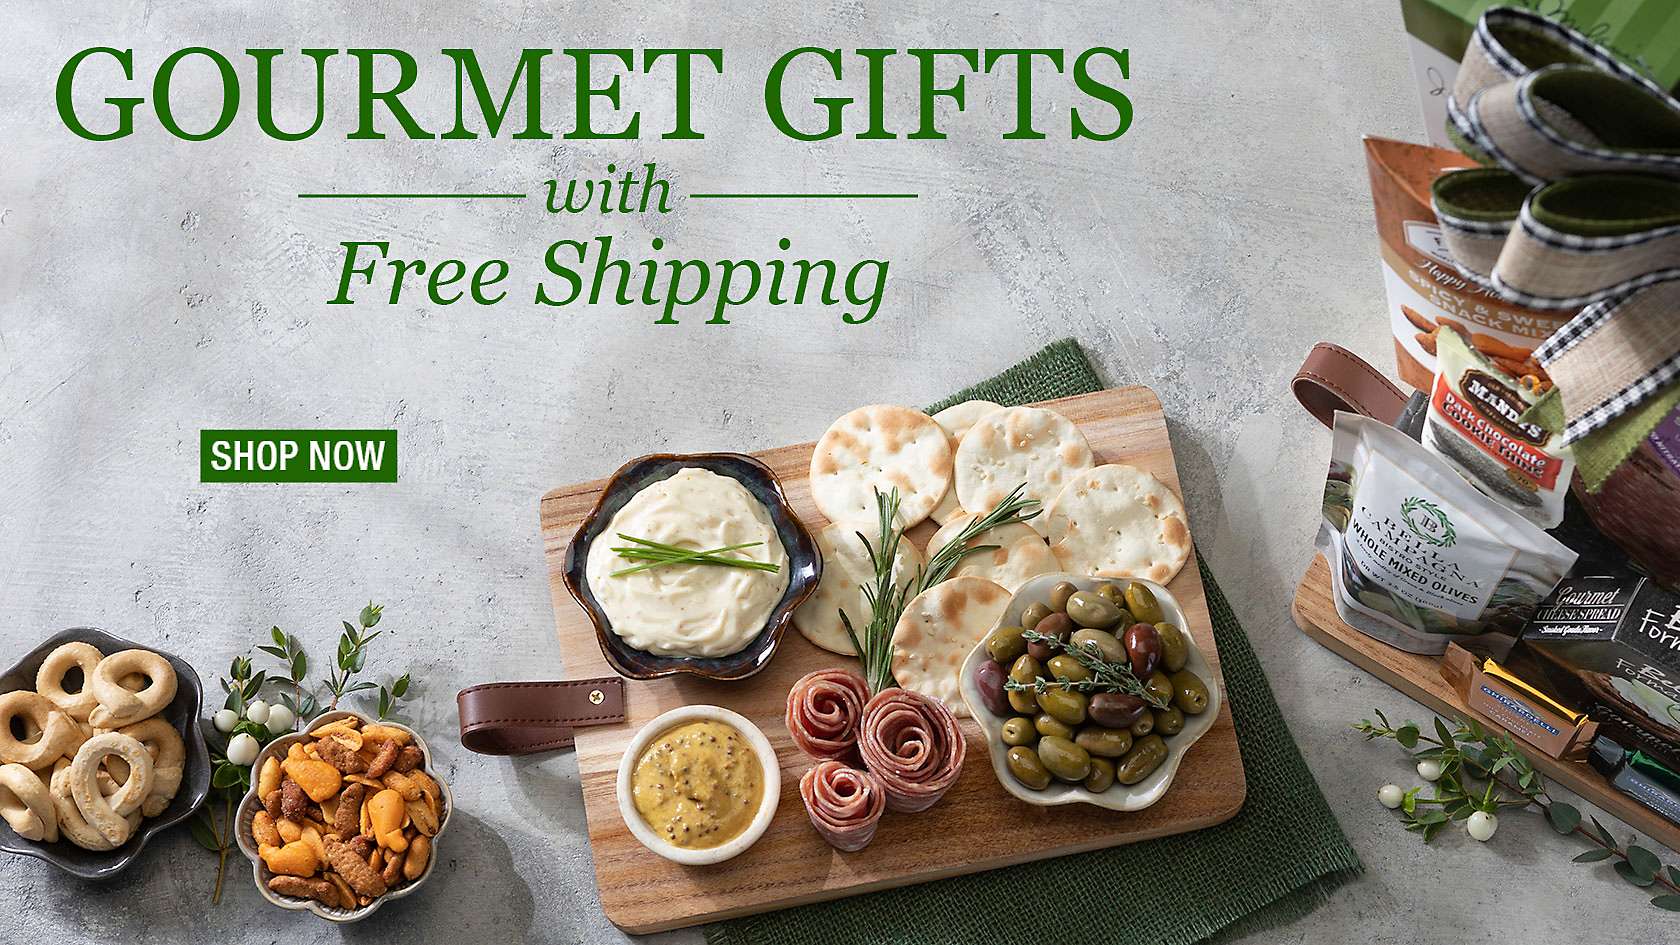 Gourmet food and wine gifts with free shipping